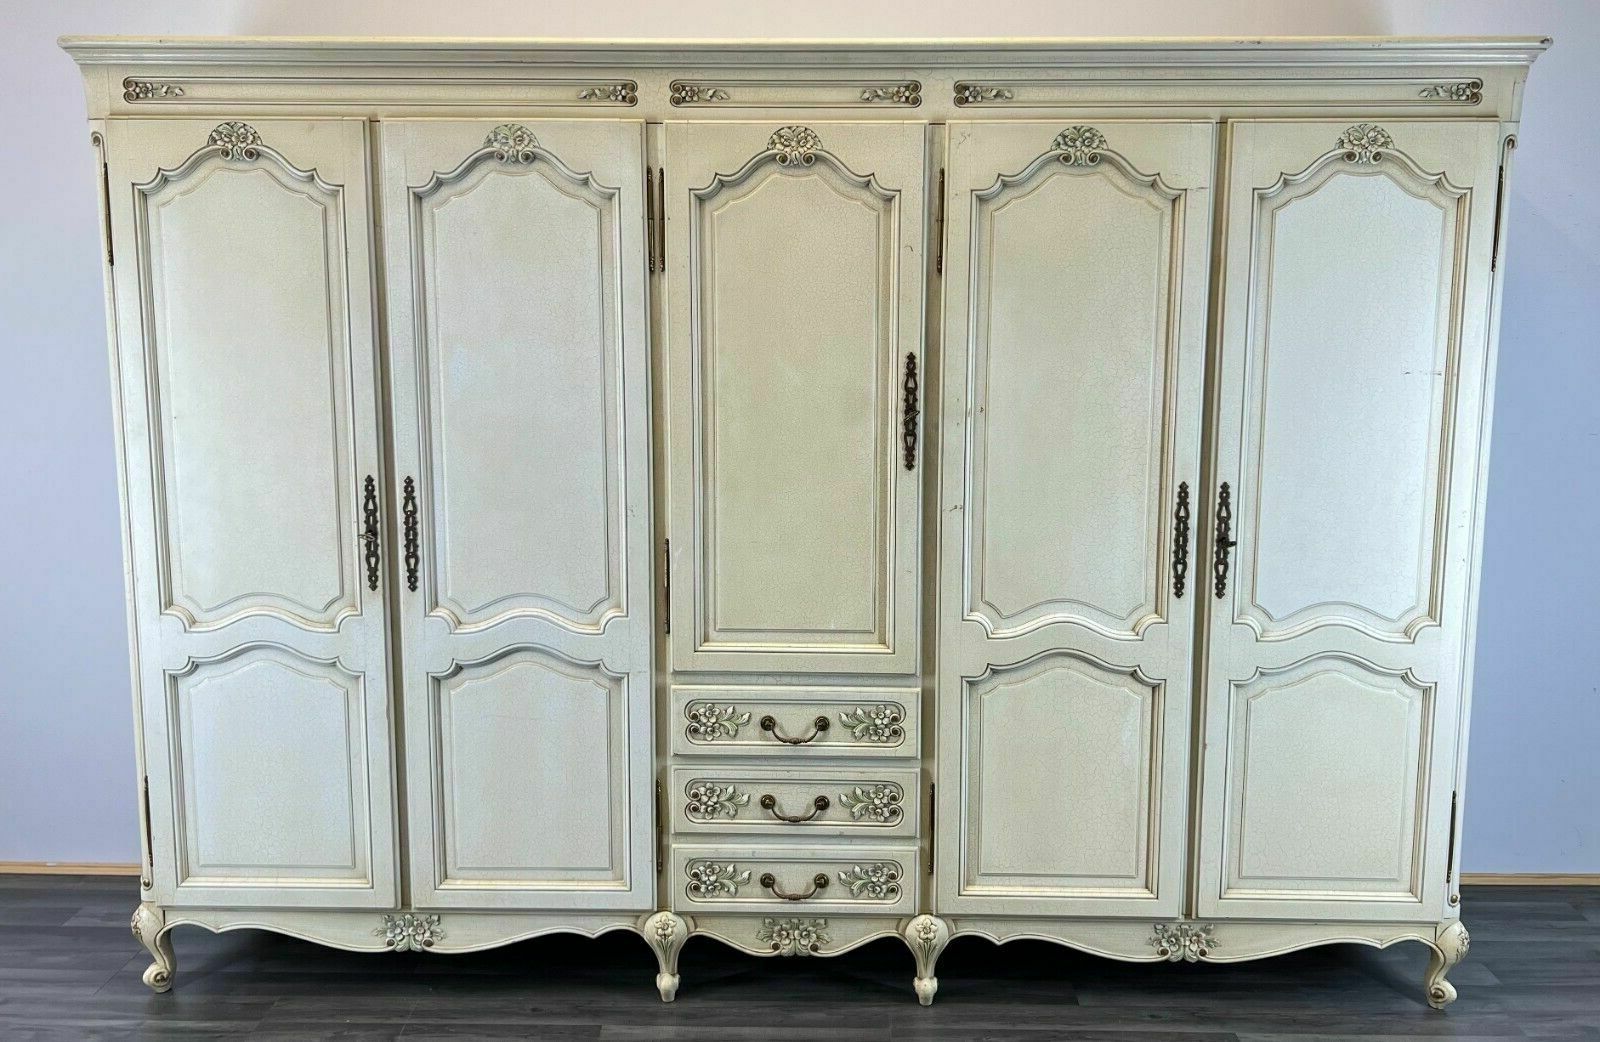 Louis Xv Style Shabby Chic French Carved 5 Door Armoire Wardrobe | Vinterior Throughout Vintage Shabby Chic Wardrobes (View 12 of 20)